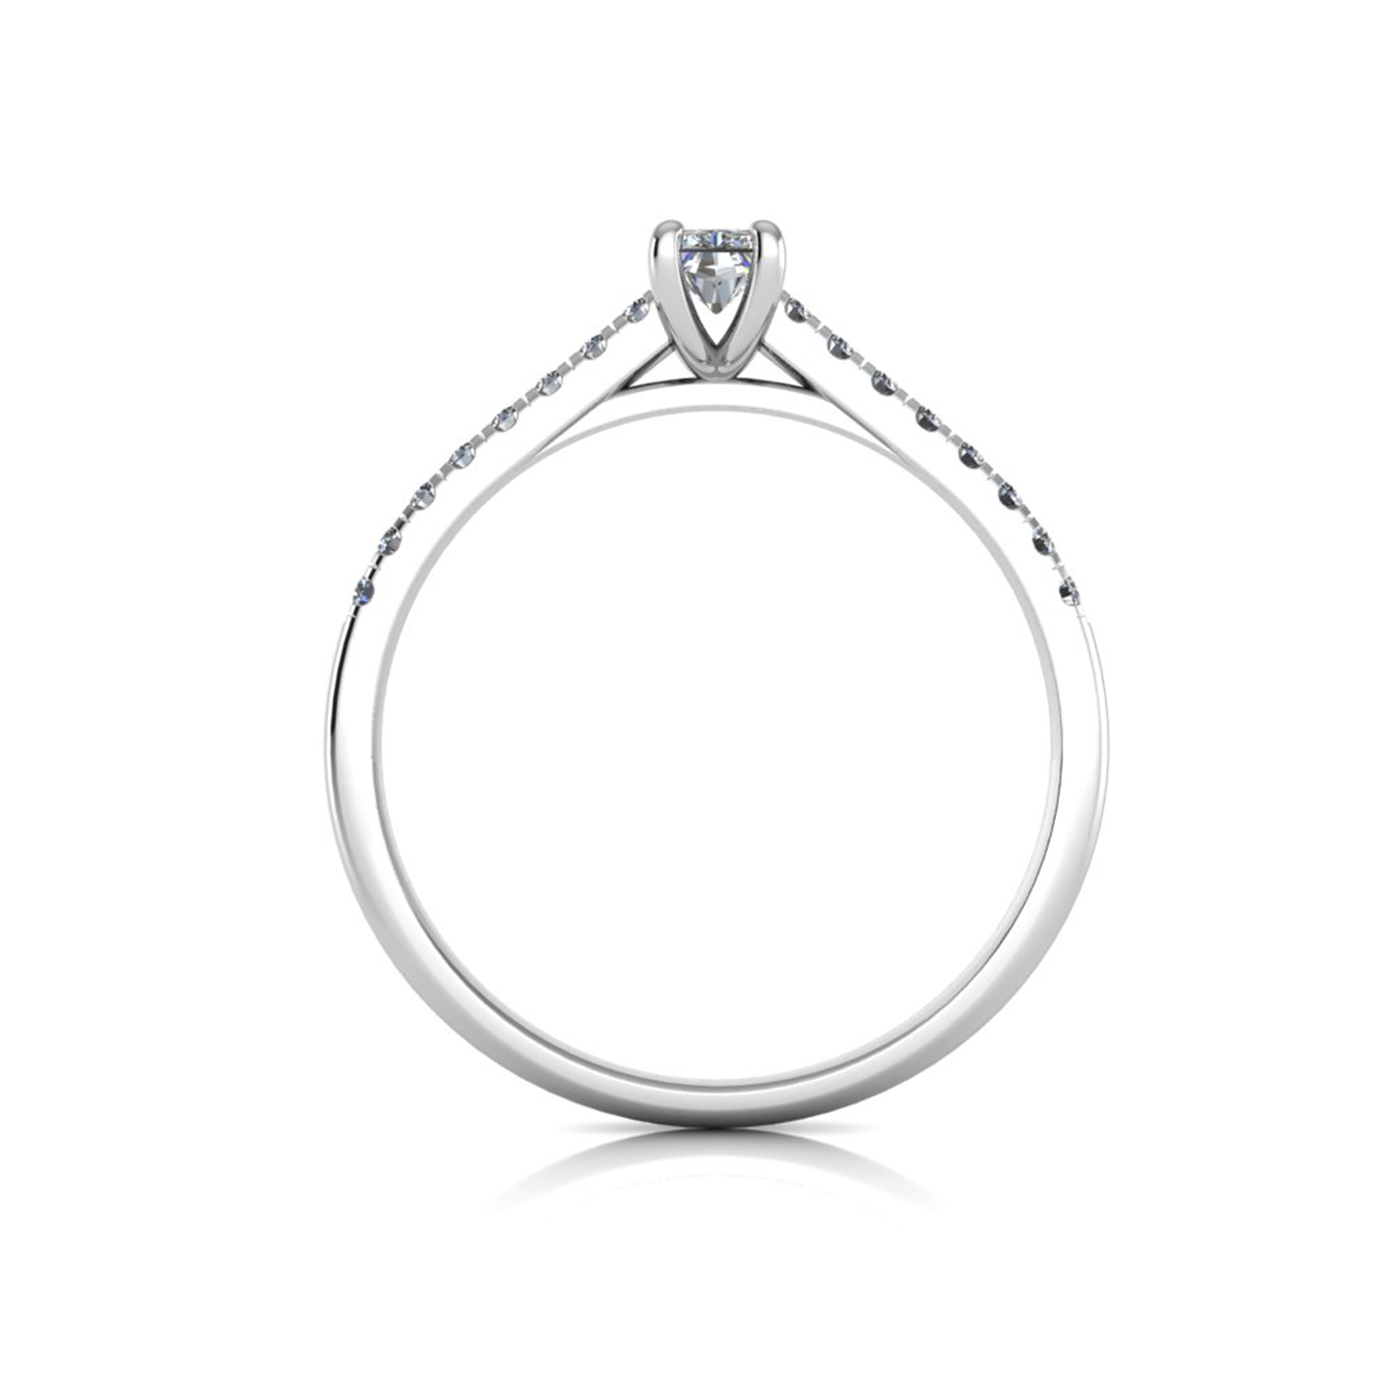 18k white gold  0,30 ct 4 prongs radiant cut diamond engagement ring with whisper thin pavÉ set band